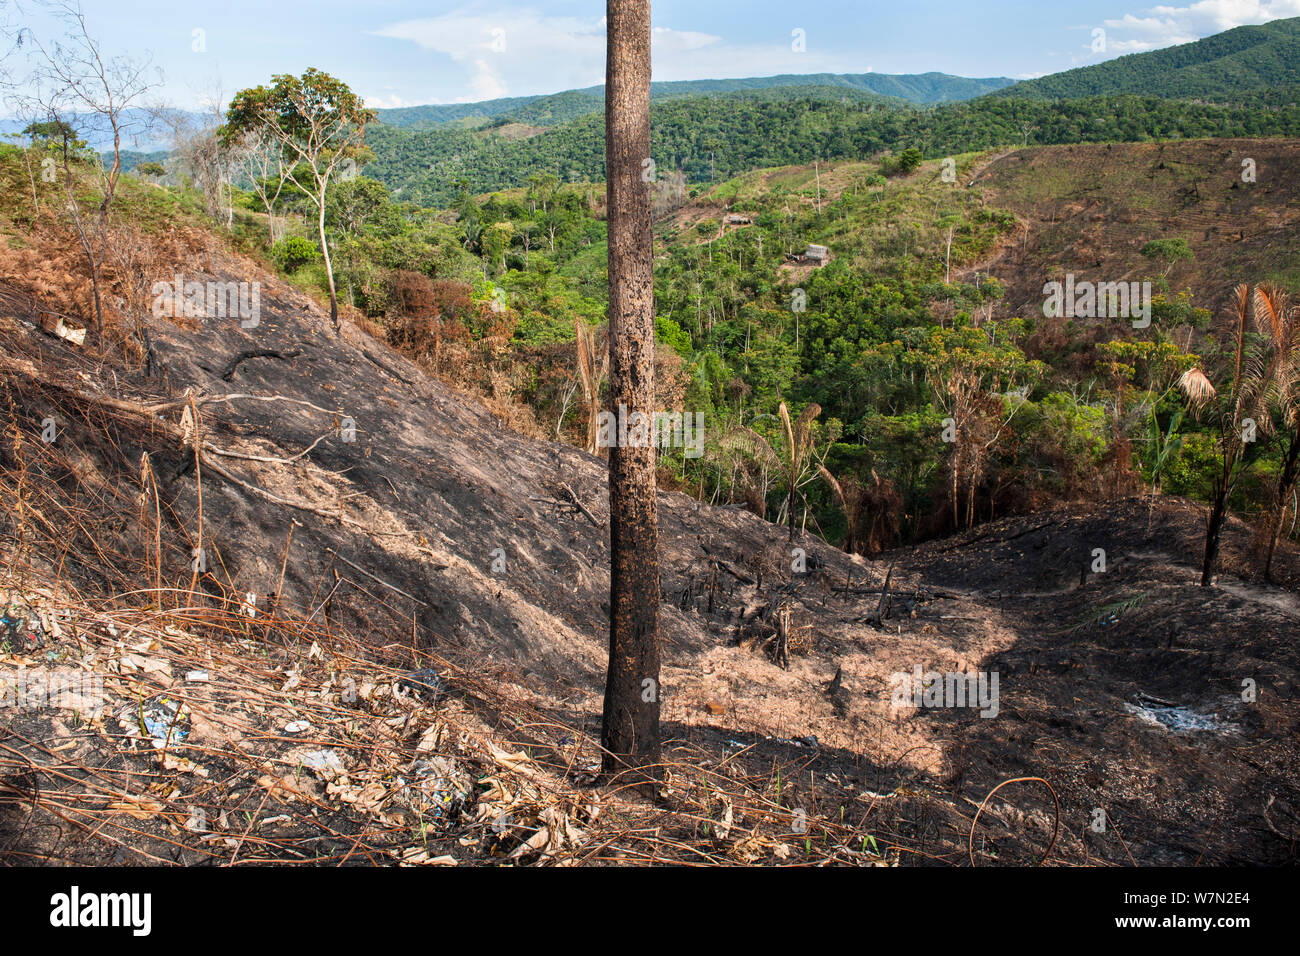 Landscape of deforested Cloud forest habitat, the forest is cleared to make room for Coca (Erythroxylum coca) plantations, Bolivia, November Stock Photo